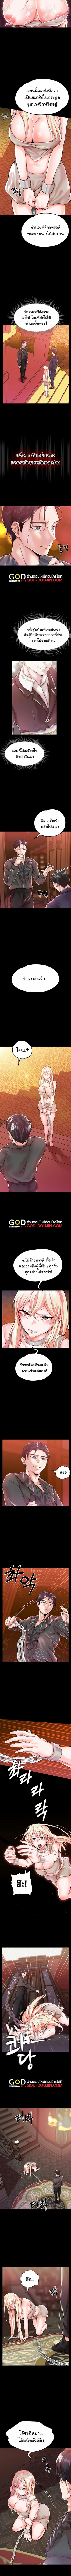 Became Assistant to Villain In RomanceFantasy 1 ภาพที่ 6